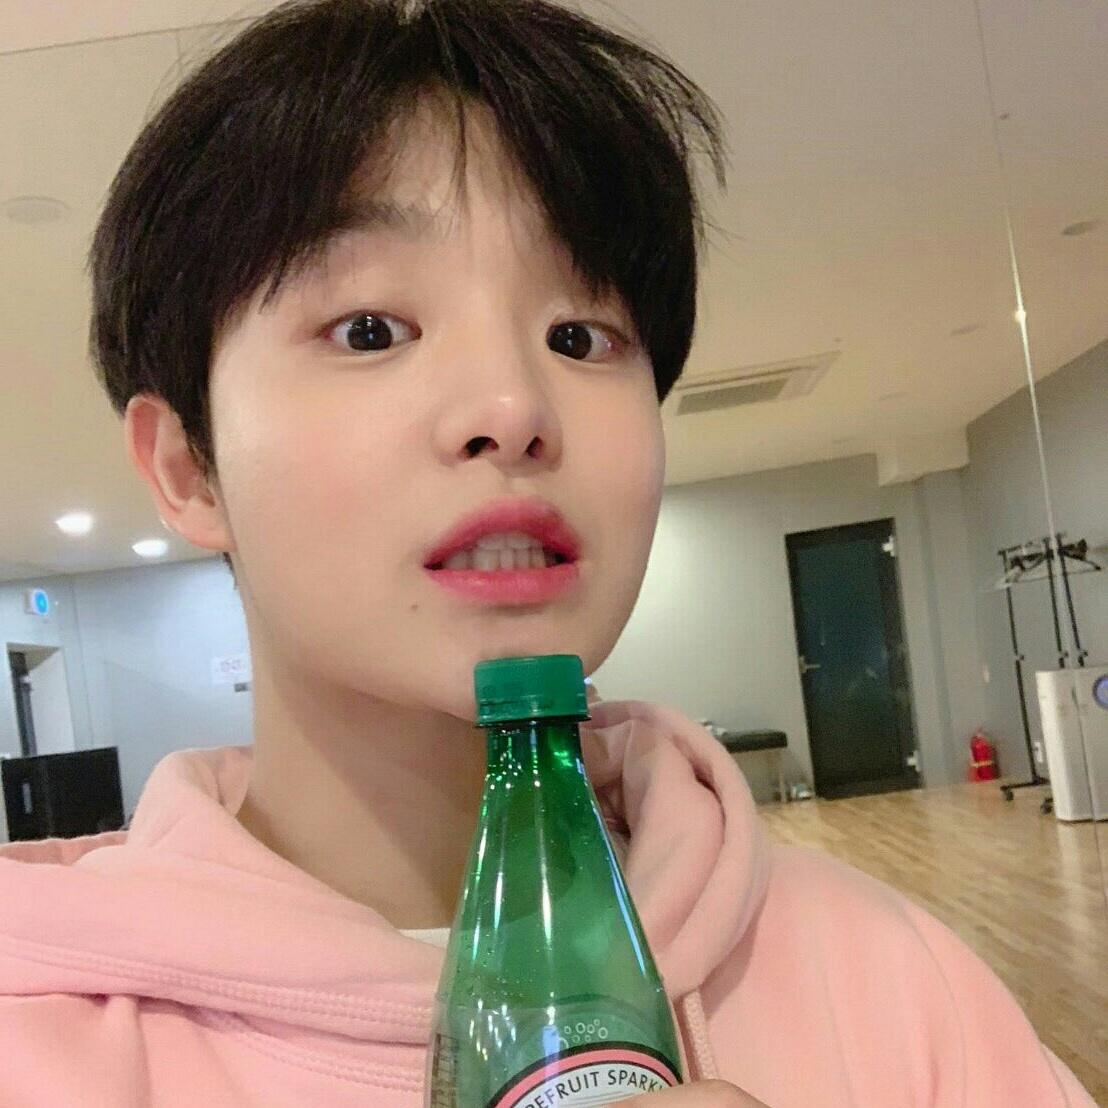 when you are busy, jihoon borrows your phone and takes a selfie in it so you would be reminded of him every time